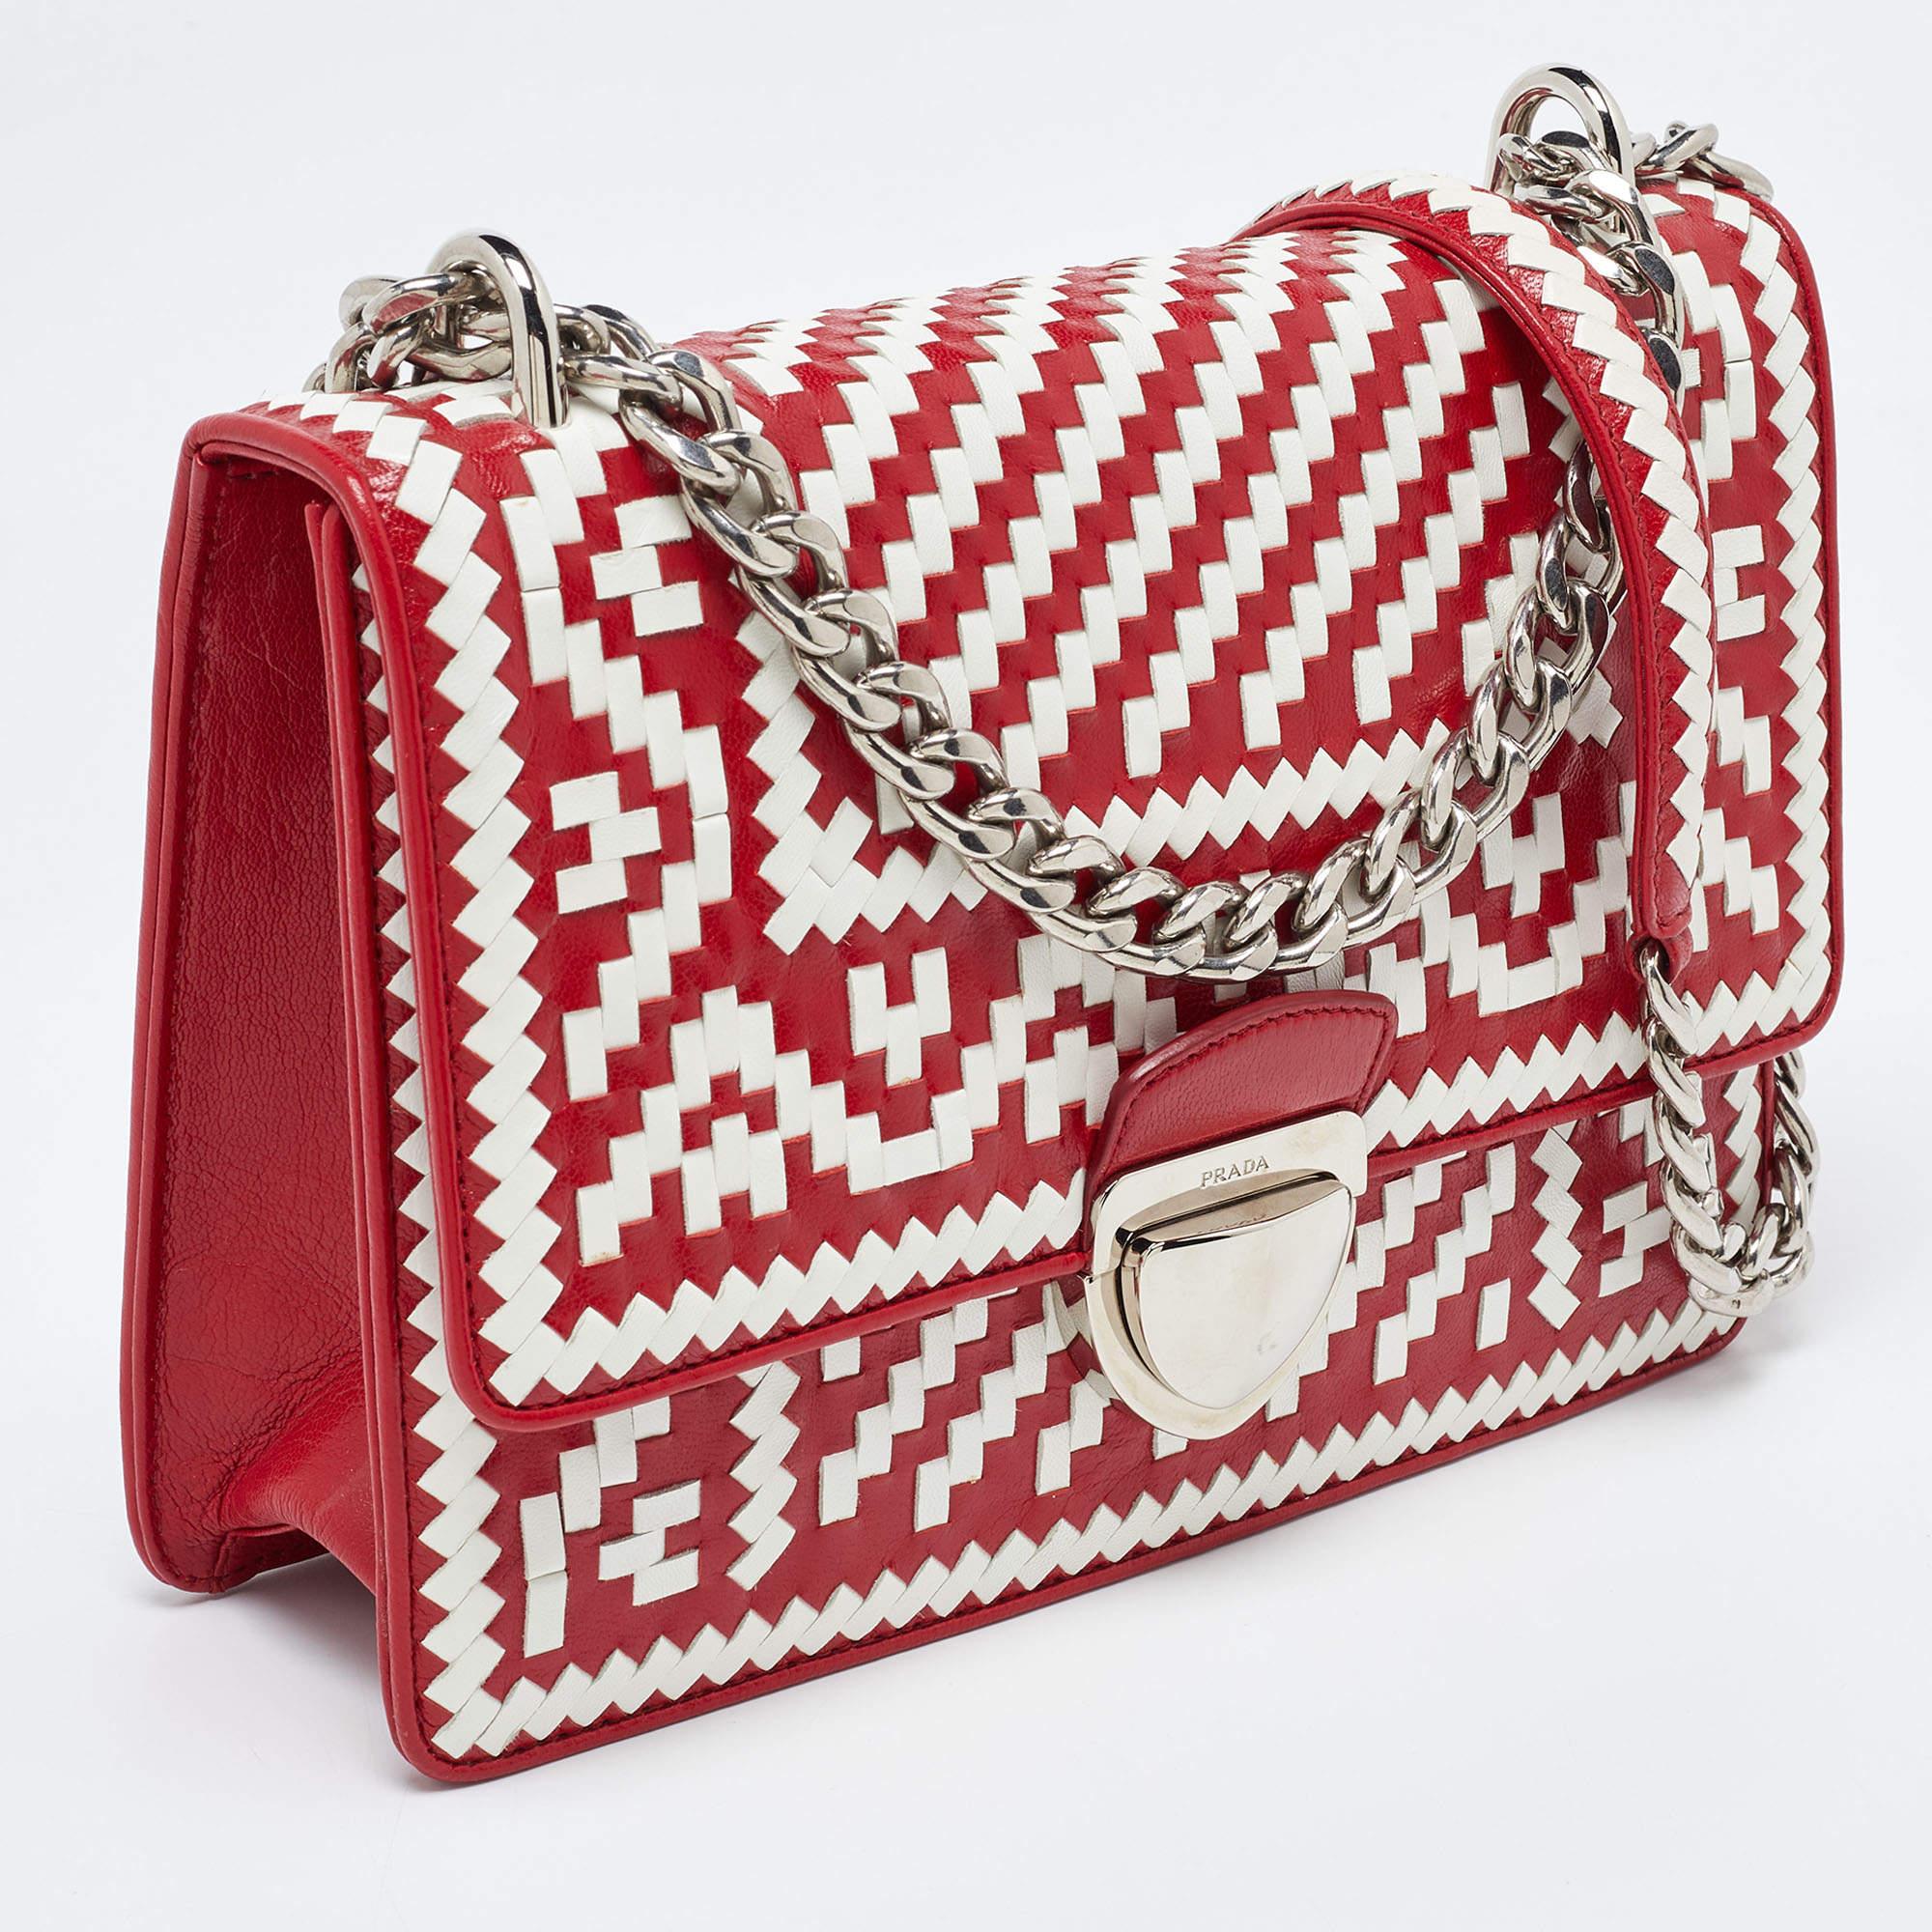 Prada Red/White Madras Woven Leather Pushlock Flap Bag For Sale 7